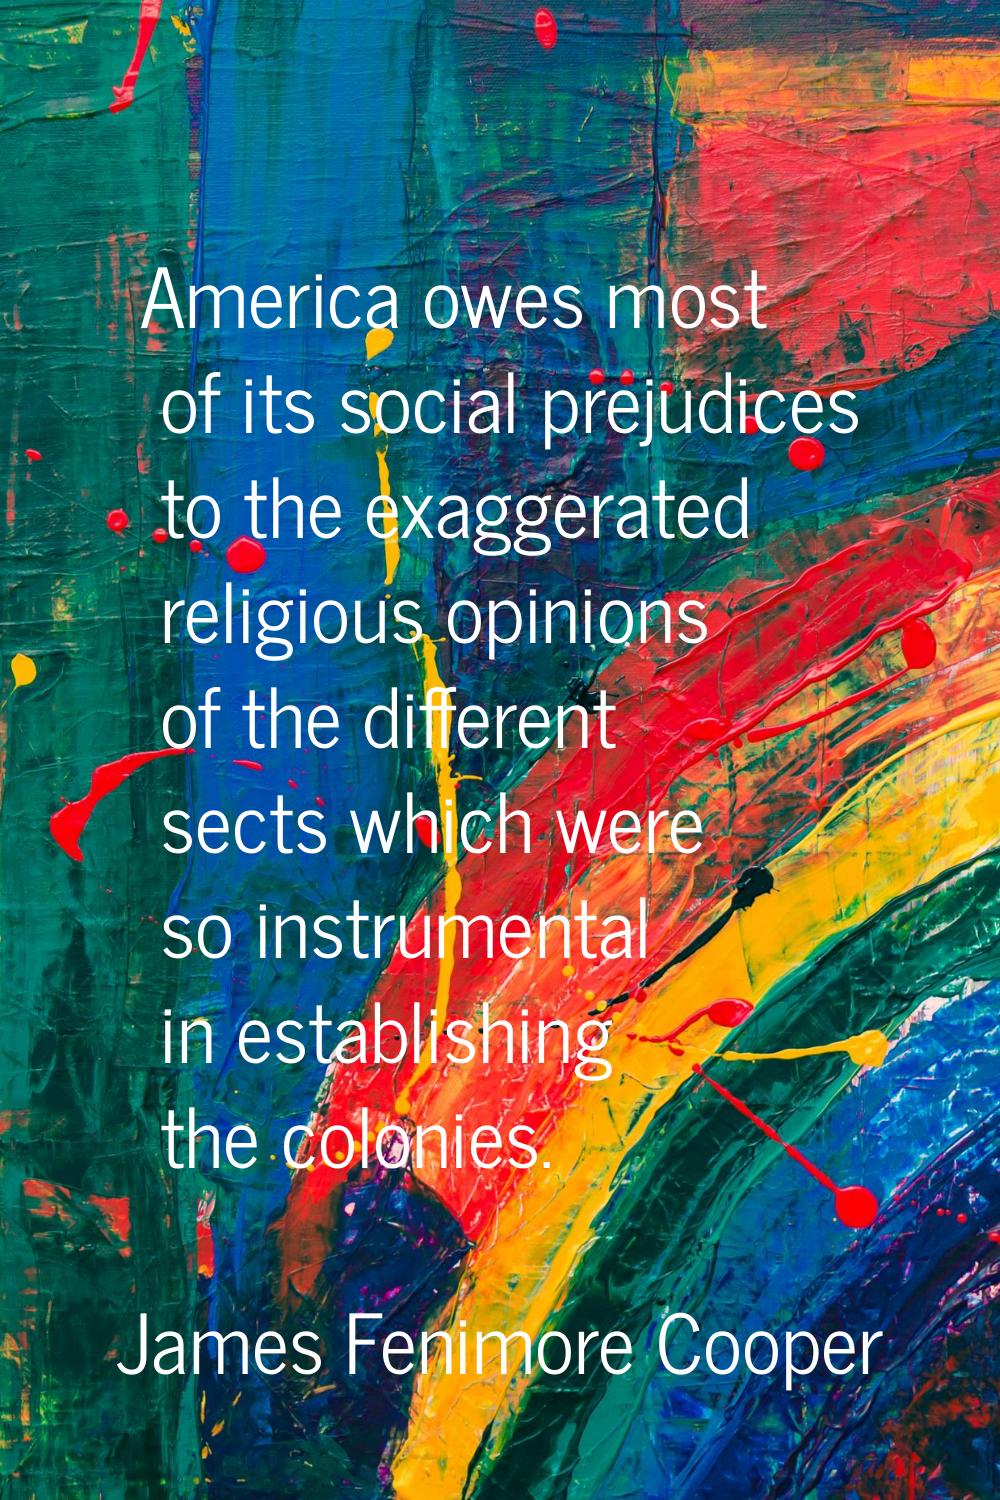 America owes most of its social prejudices to the exaggerated religious opinions of the different s